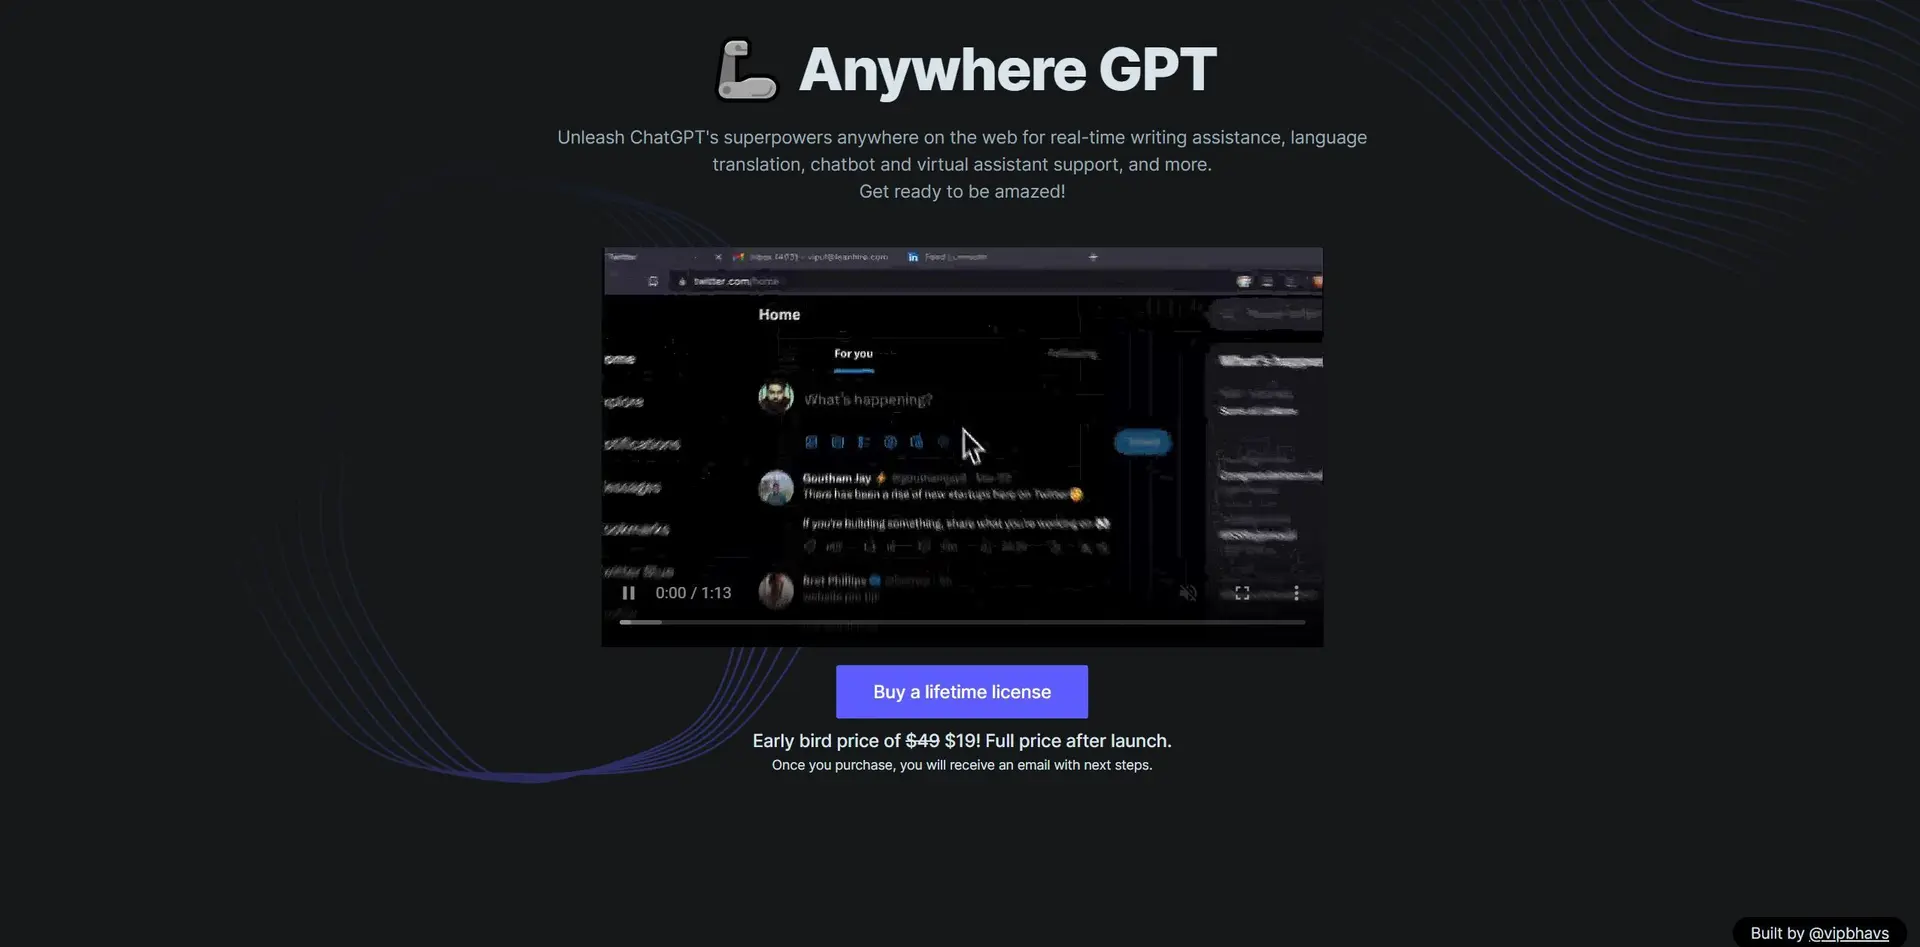 Anywhere GPTwebsite picture